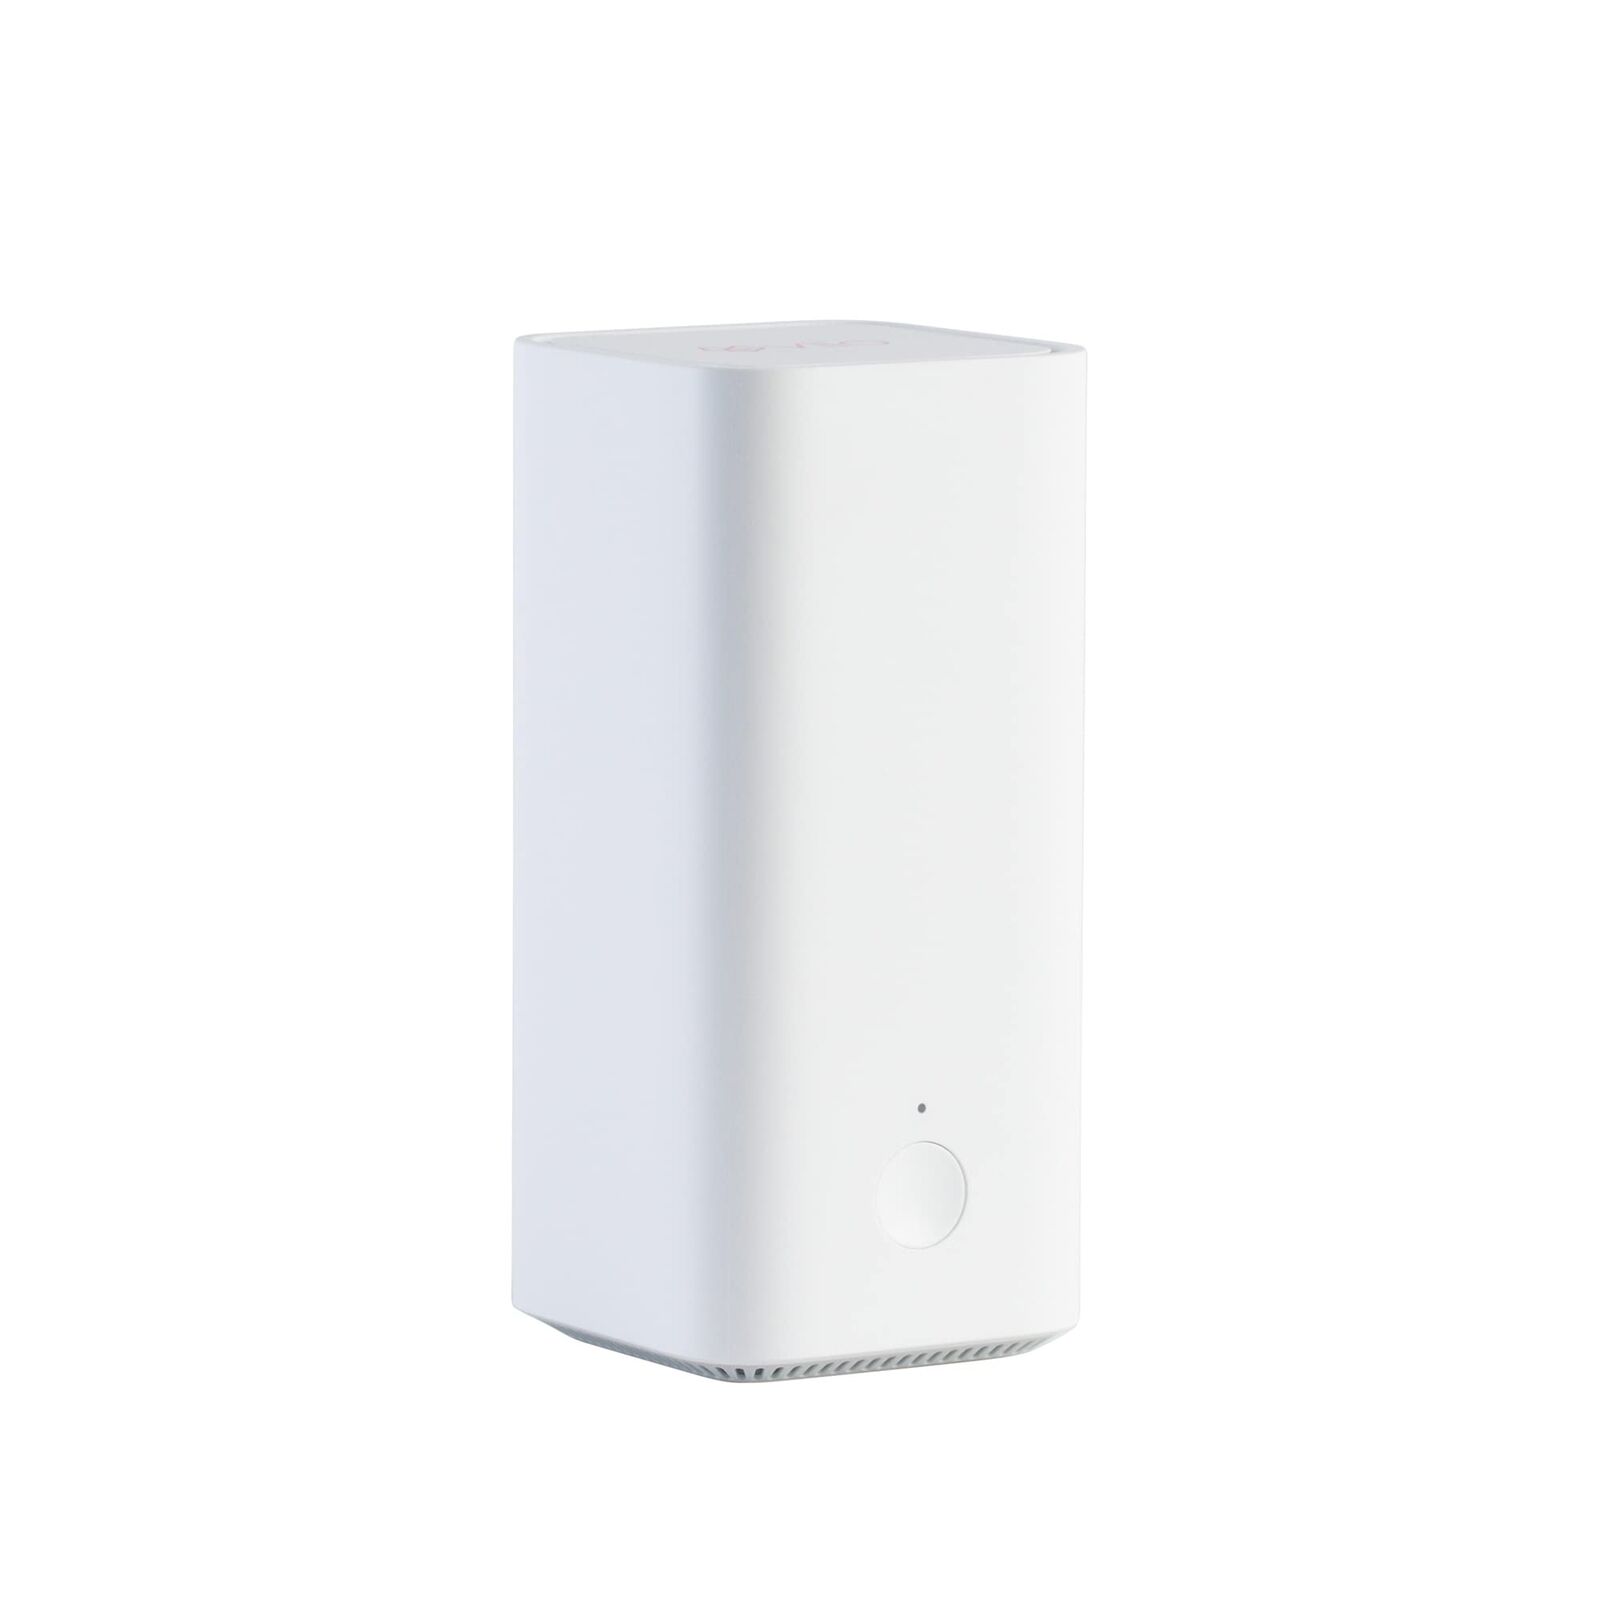 Vilo Mesh Wi-Fi Router for Wireless Internet, Dual Band AC1200 Coverage Up to...